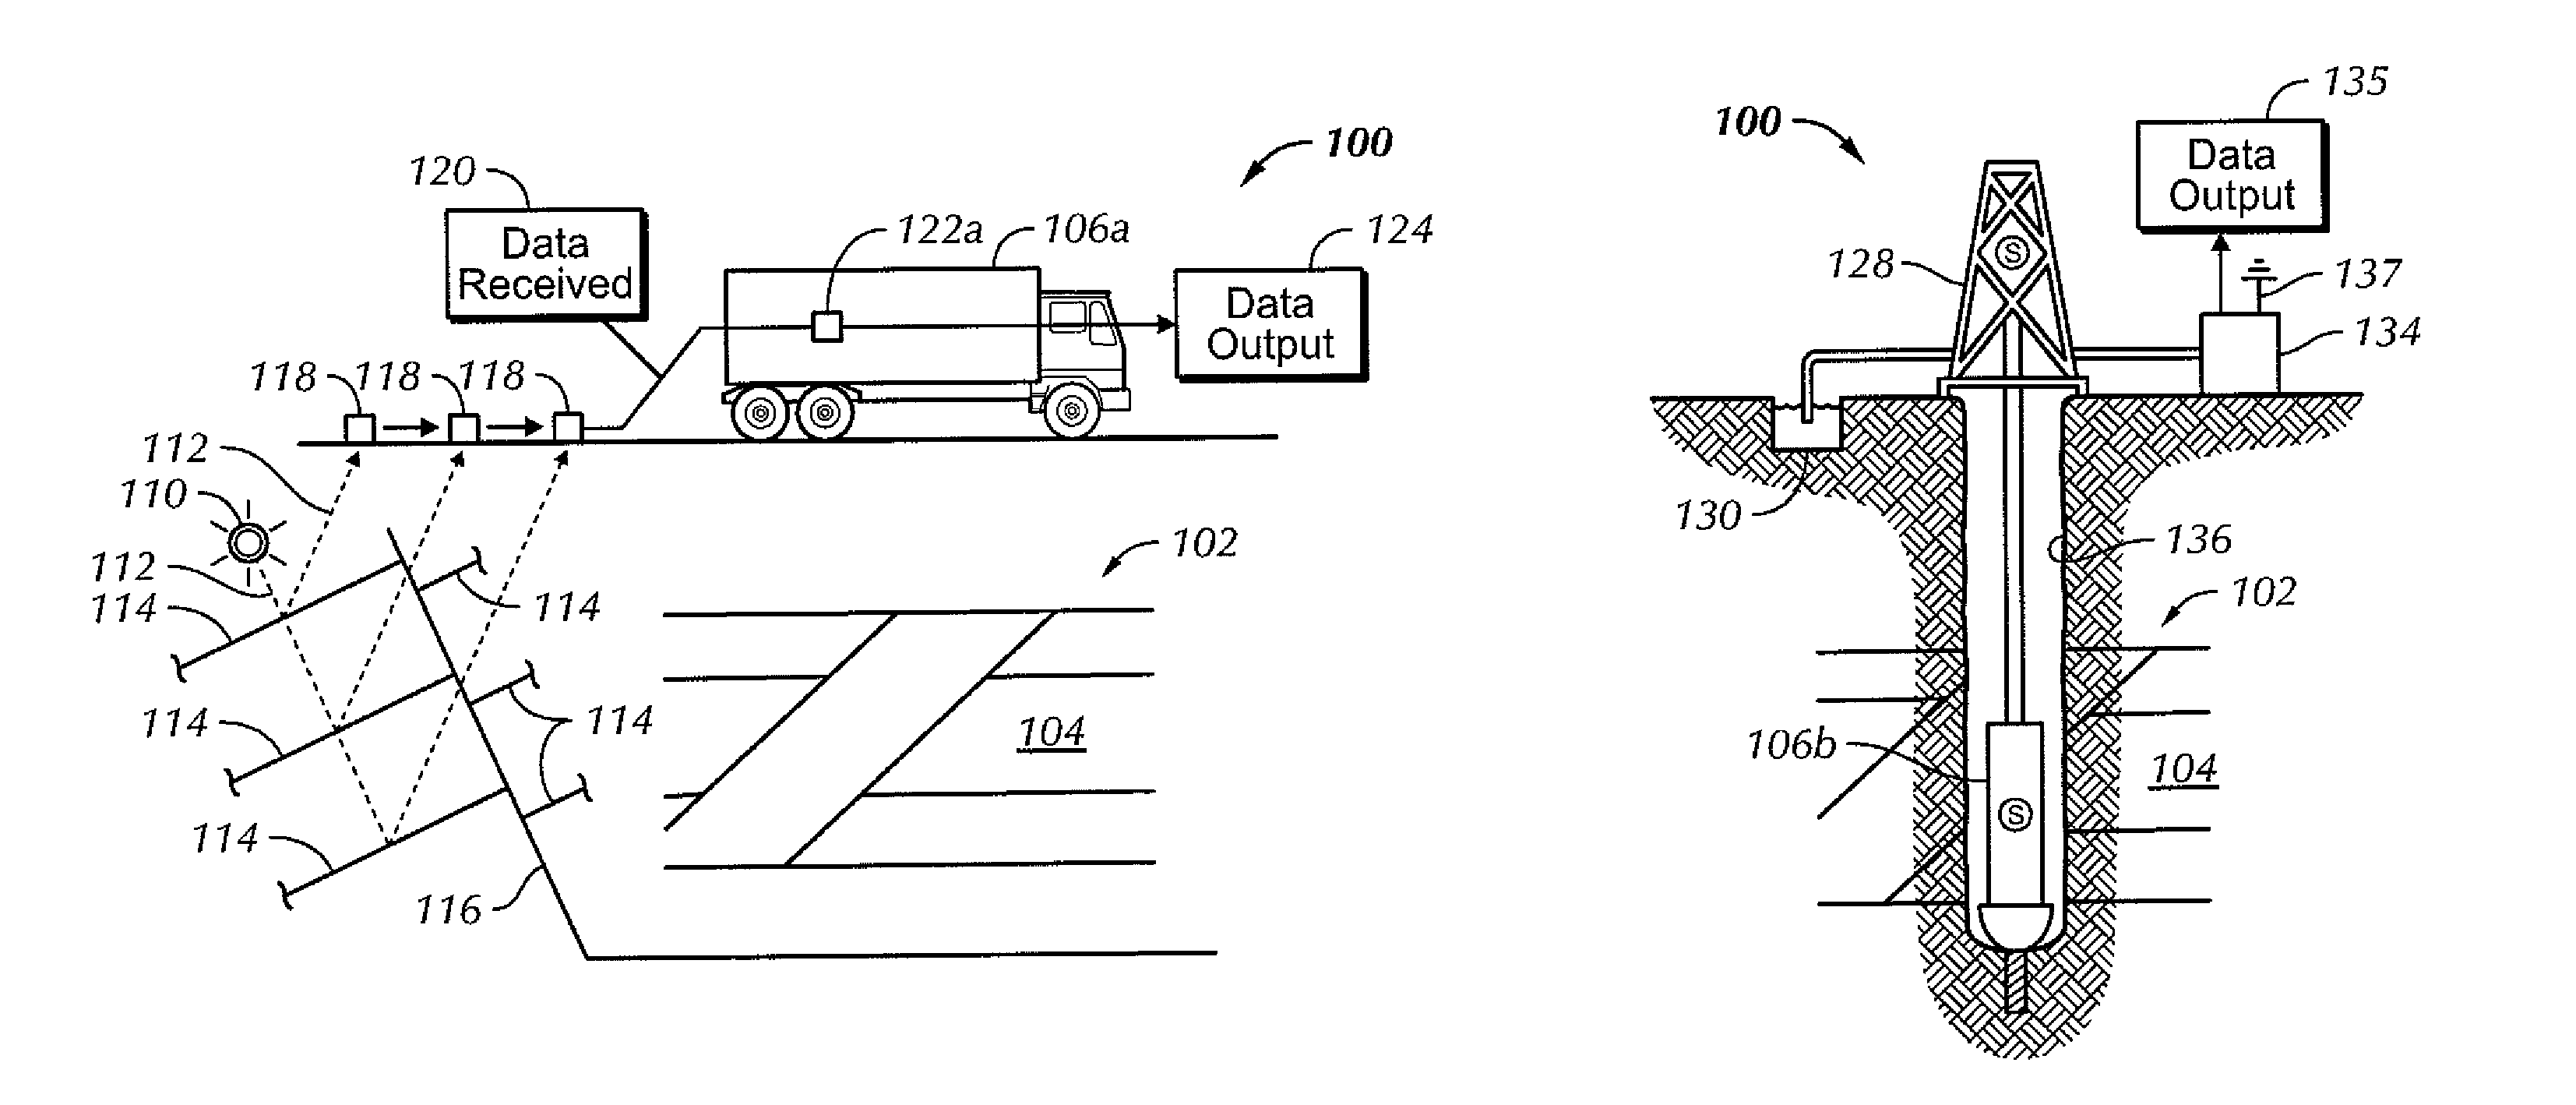 Method of performing integrated oilfield operations